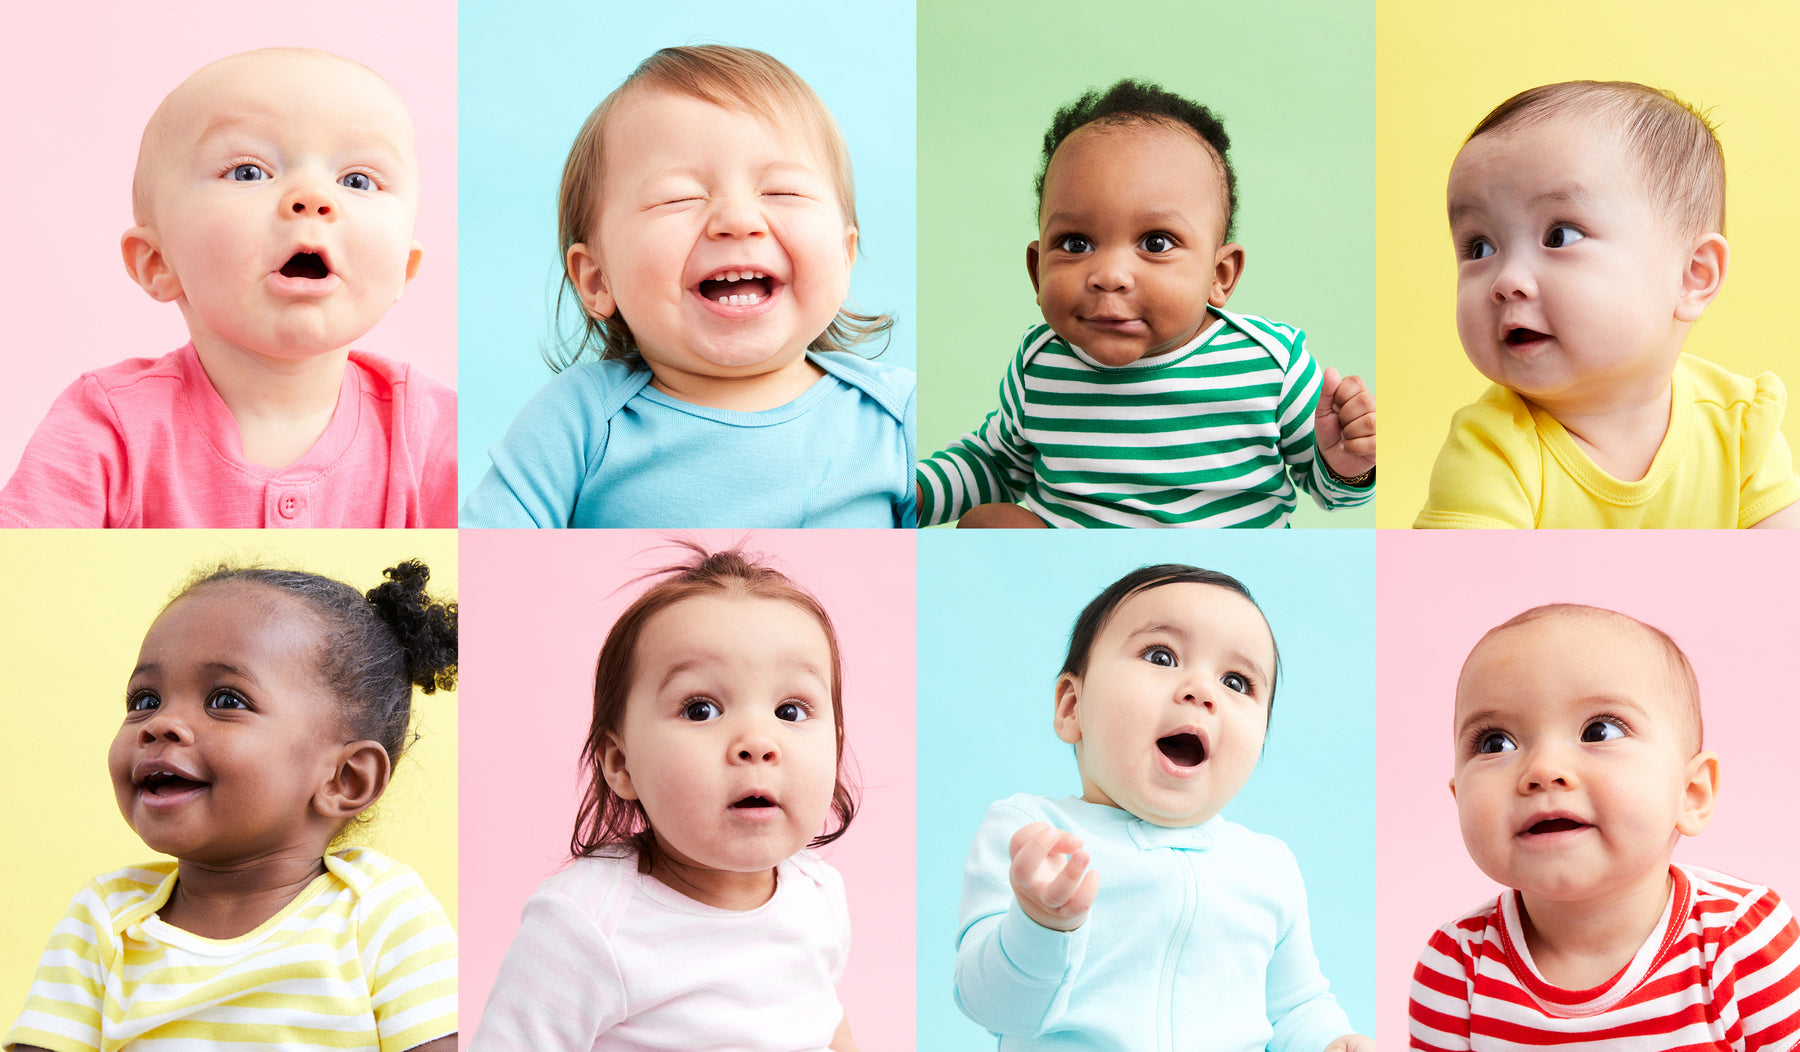 collage of close up portraits of baby boys and girls in colorful clothing on colorful backgrounds